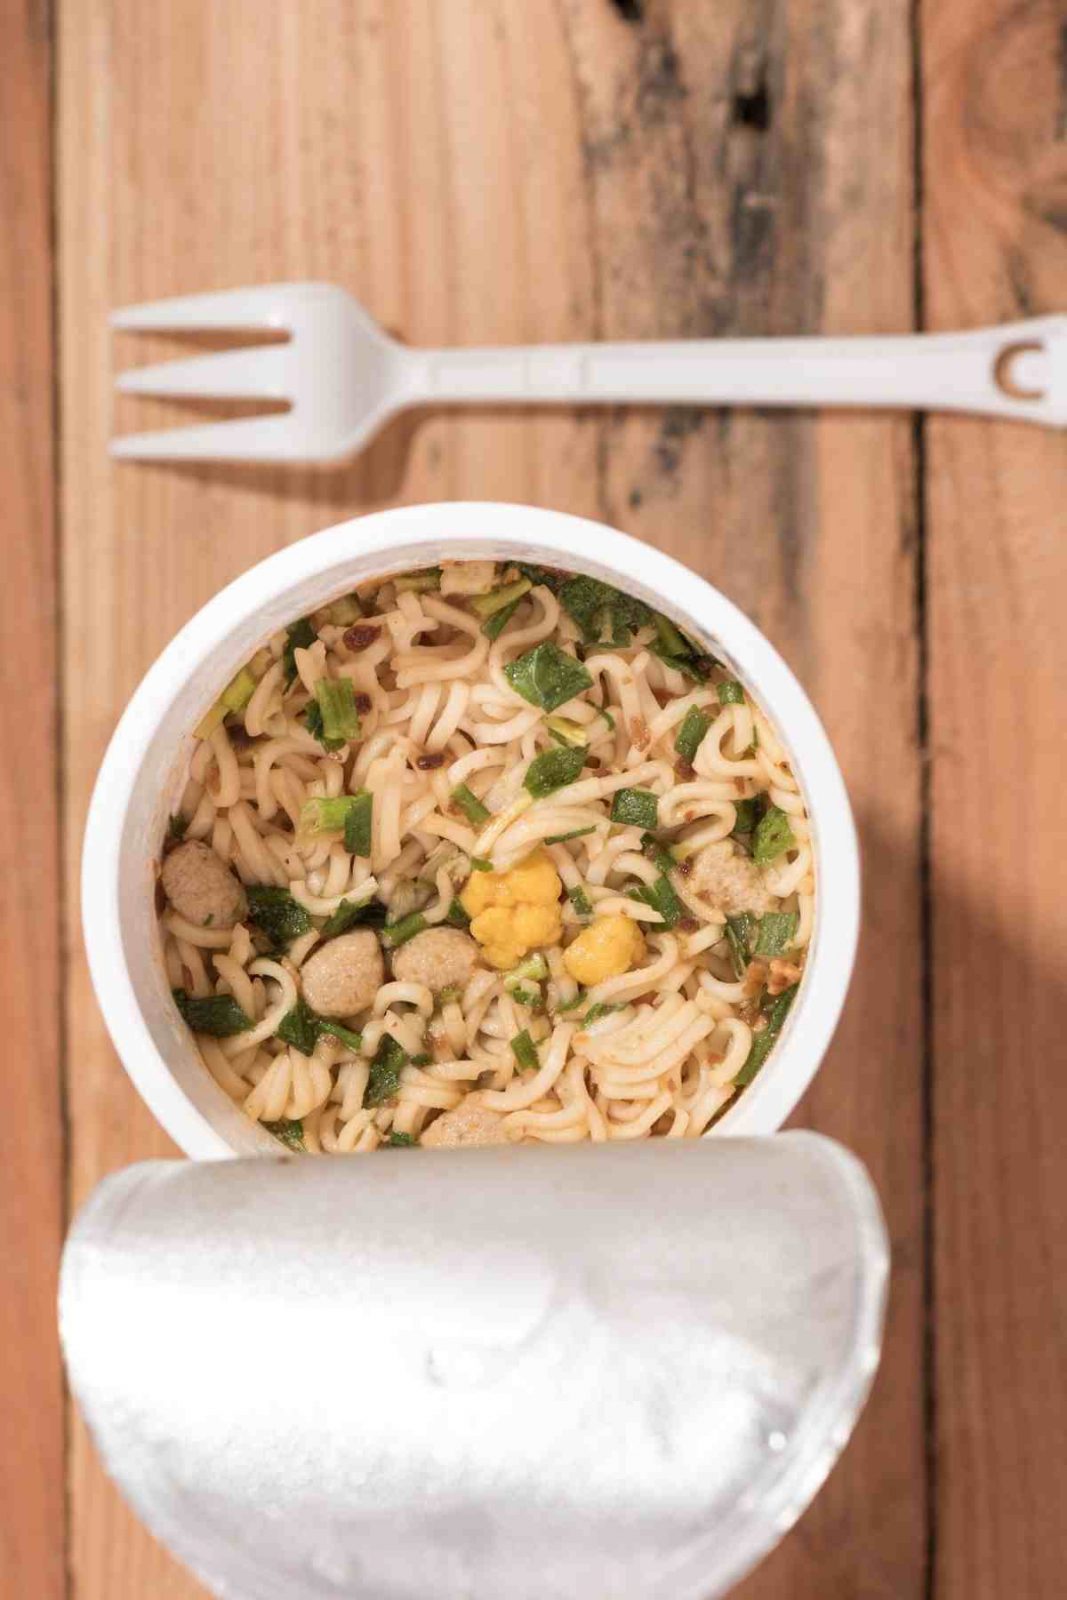 Whether you call them cup noodles, instant noodles, or ramen noodles, these quick and easy snacks are super convenient. Ever wonder whether you can microwave cup noodles. Read on to find out!